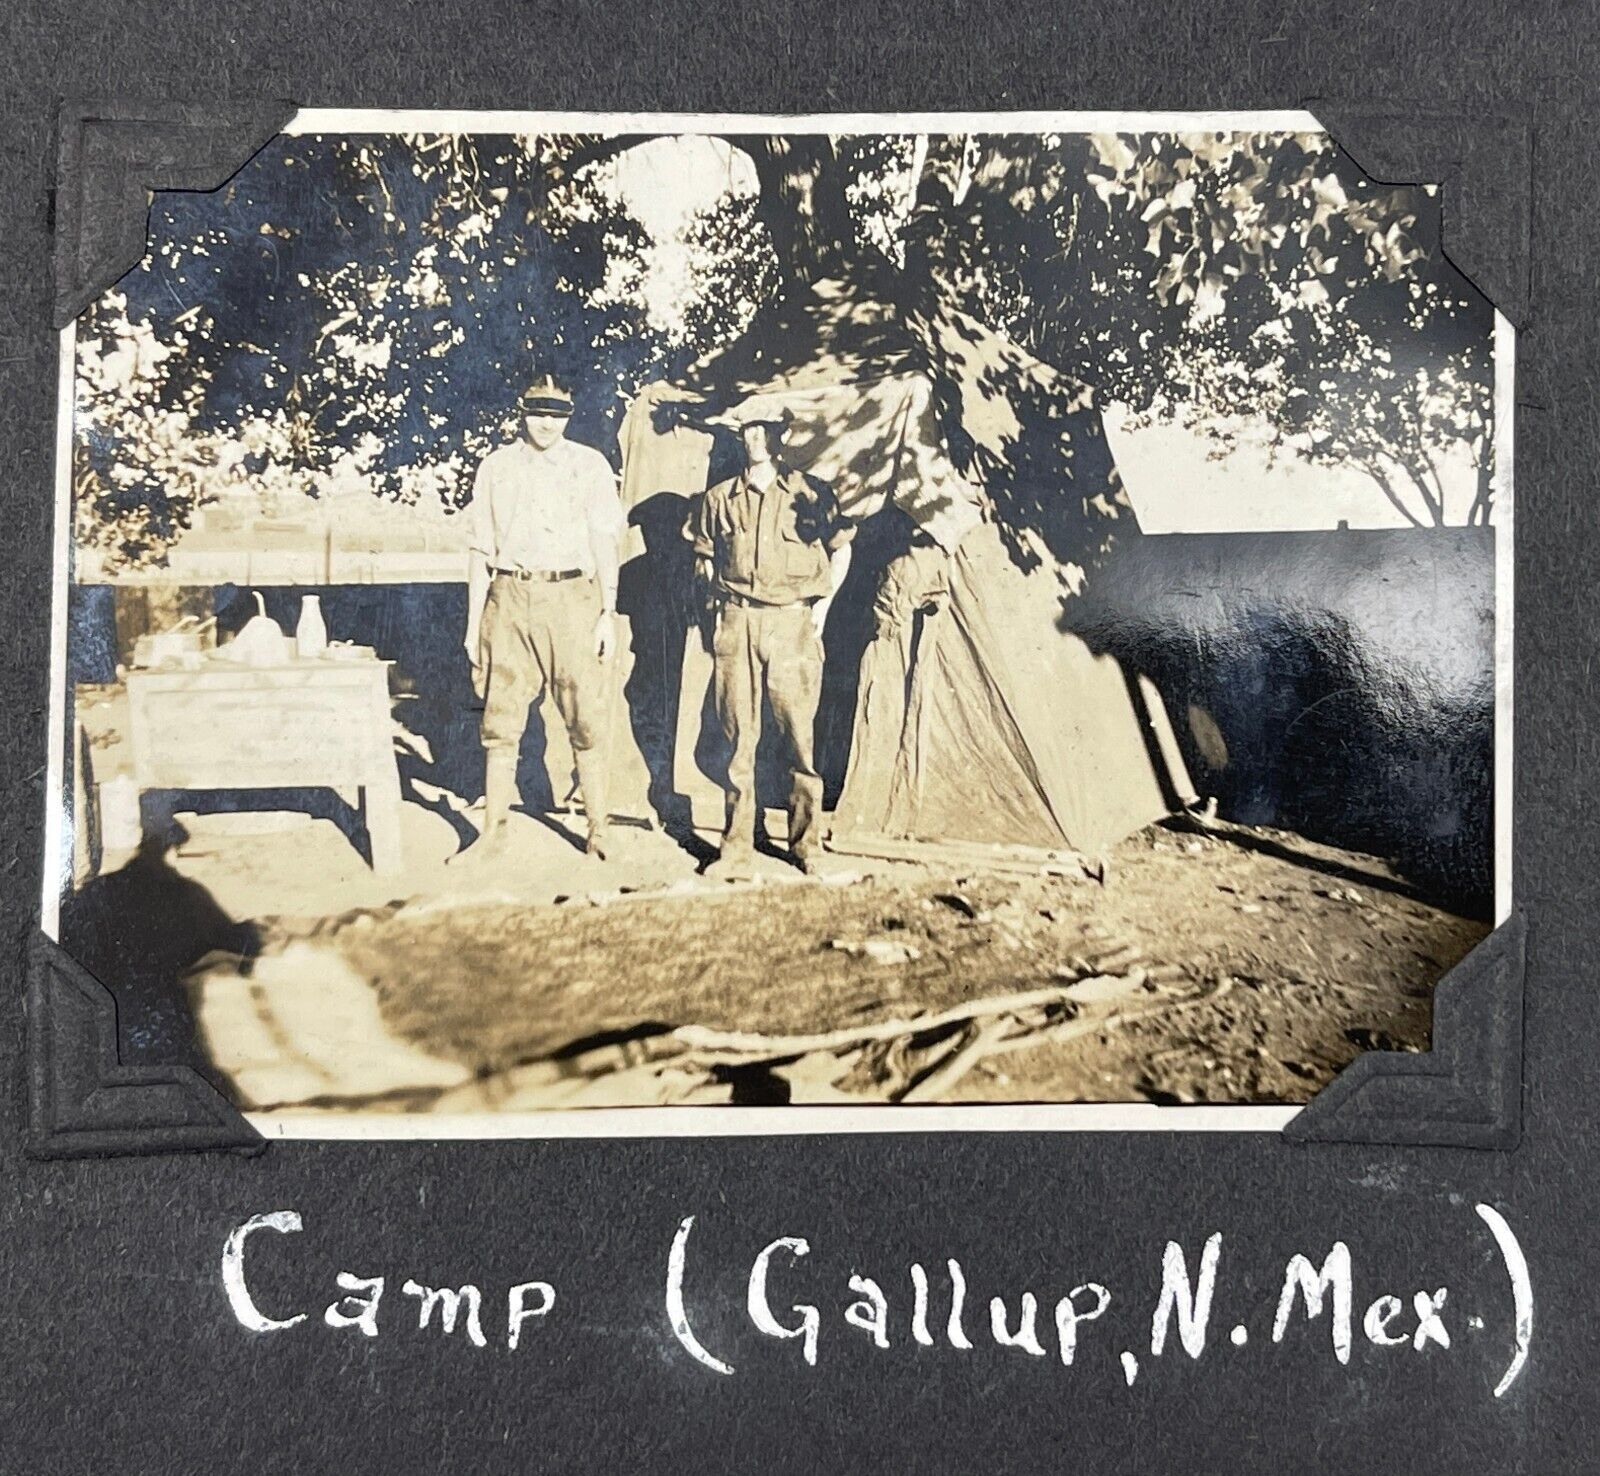 CAMPING IN GALLUP NEW MEXICO 1930s Antique Photo Camp Site Tent 3.25 x 2.25